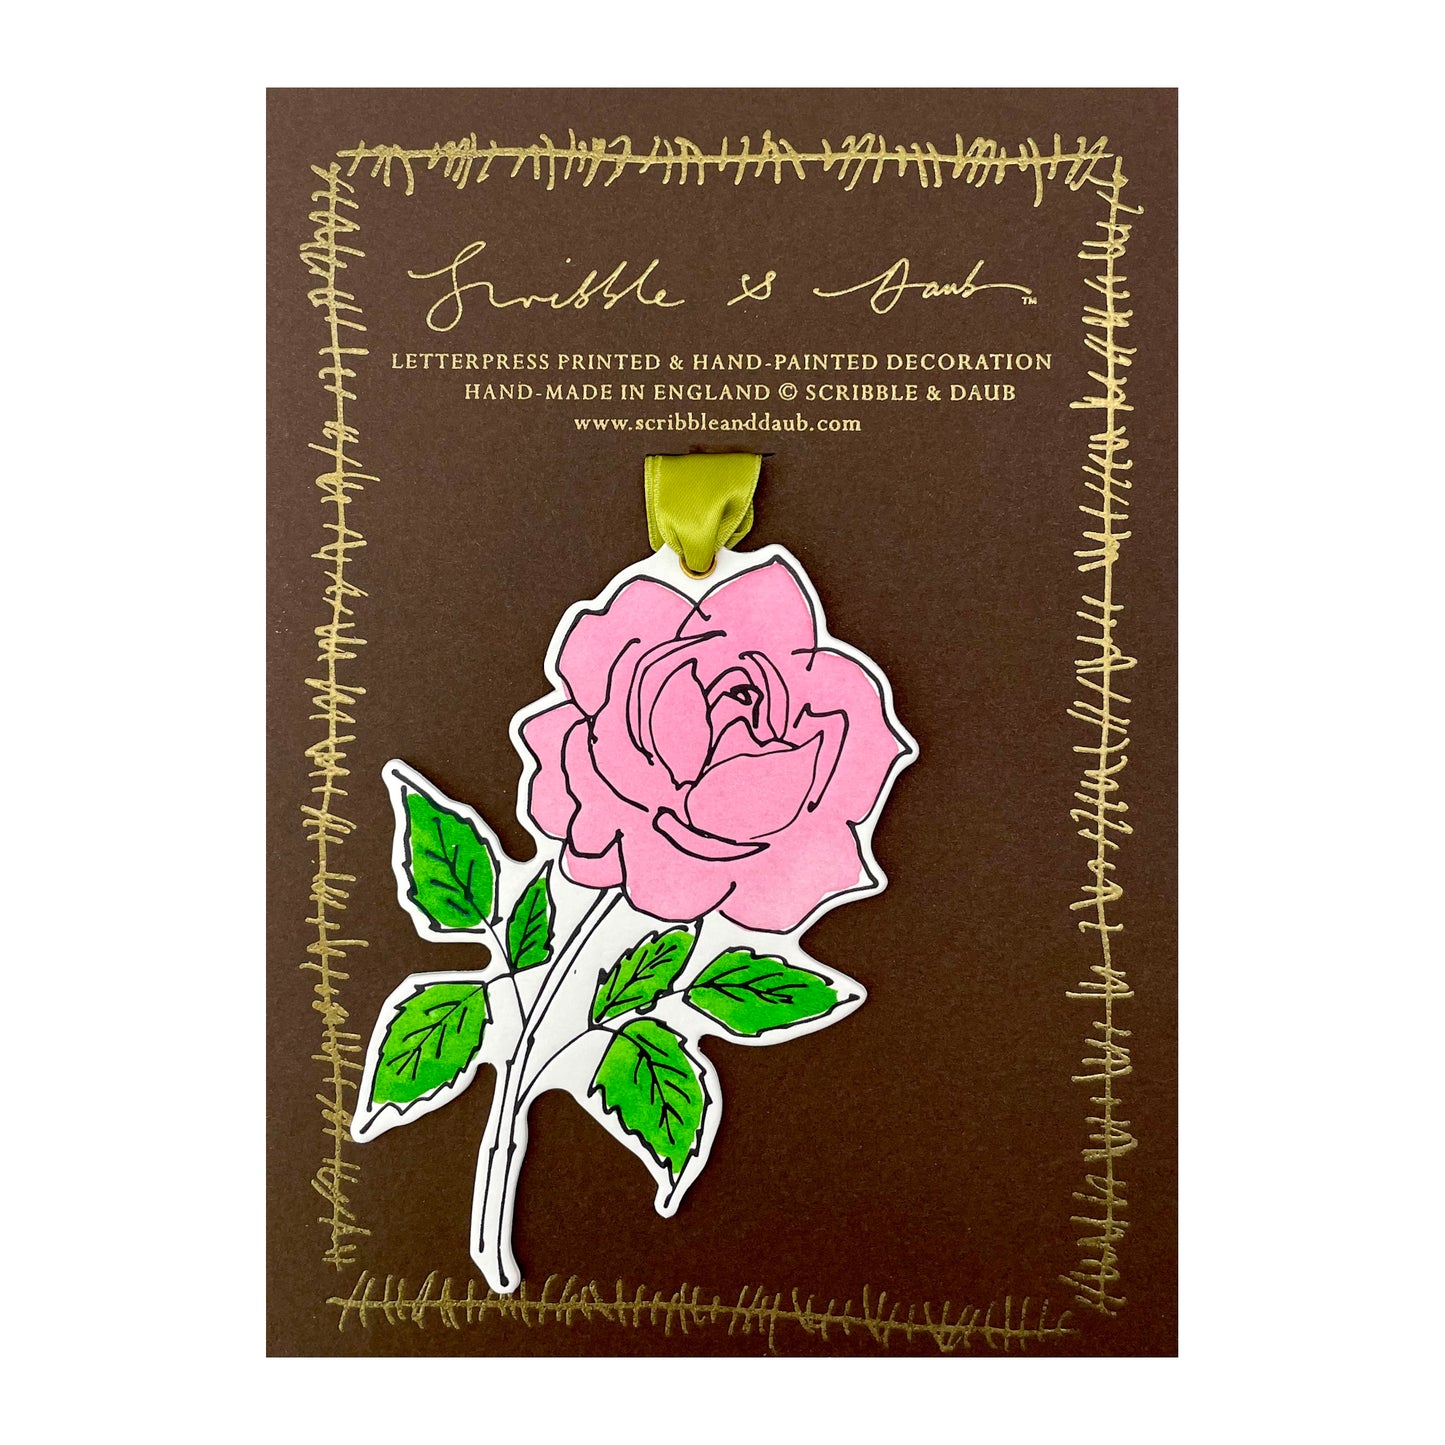 a rose shaped hanging ornament made of thick 1050gsm off-white card, letterpress printed in black and then hand painted in pink and green ink. It has a chartreuse green satin ribbon to hang the ornament with. By Scribble & Daub. Pictured on a gold-foiled brown board.